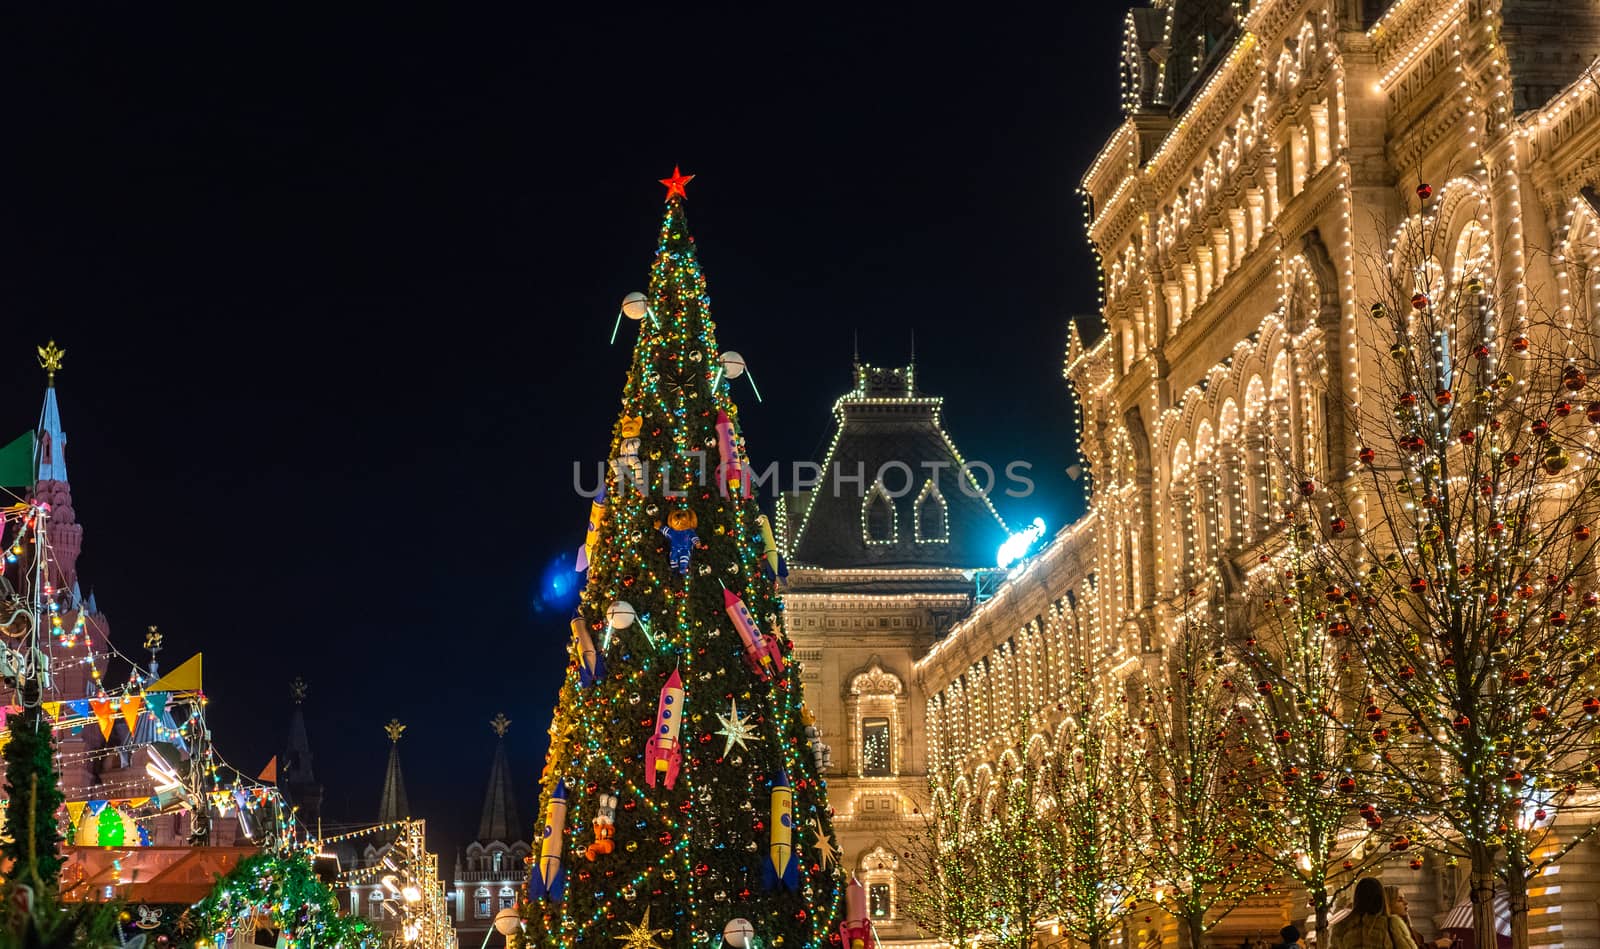 December 20, 2019. Moscow, Russia. Decorated Christmas tree on red square in front of the Gum building in Moscow at night.